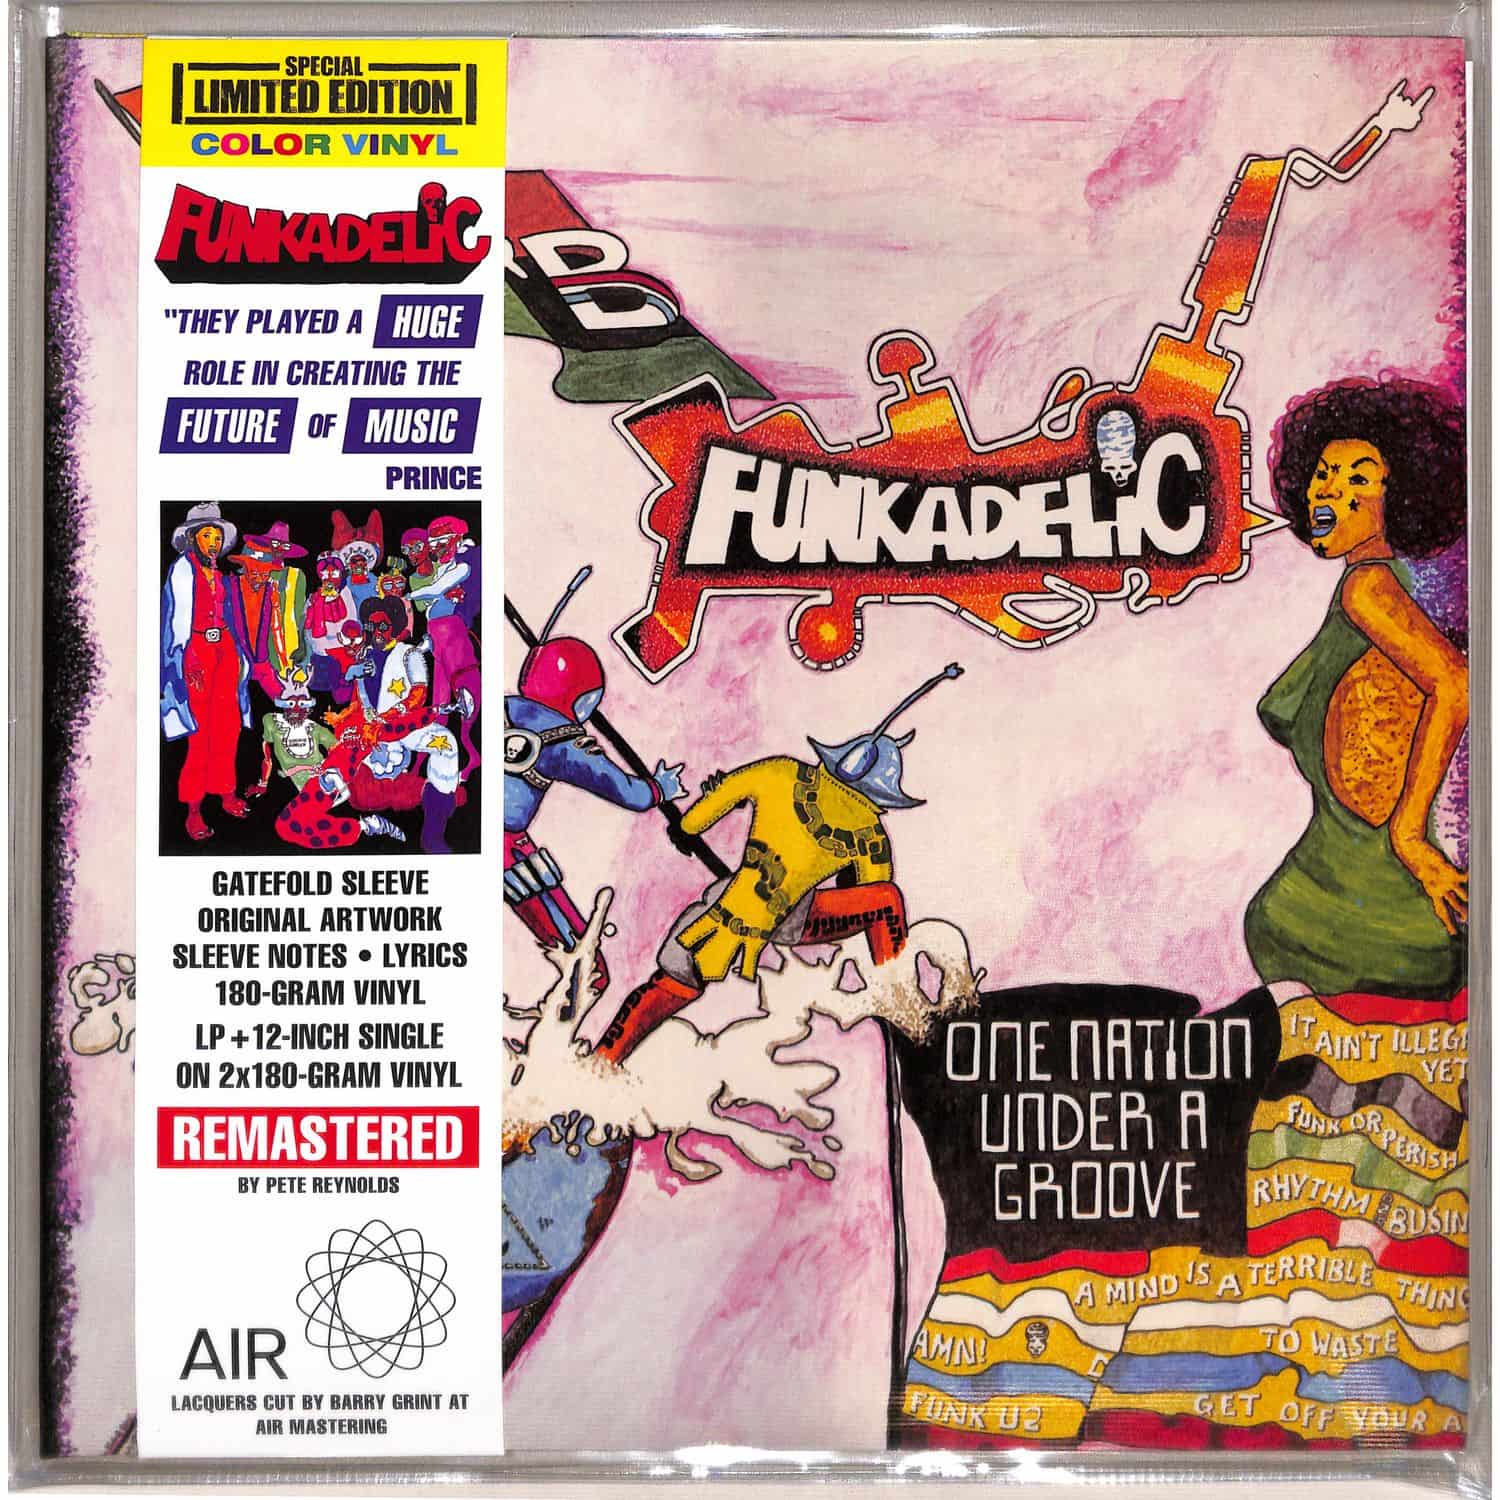 Funkadelic - ONE NATION UNDER A GROOVE 